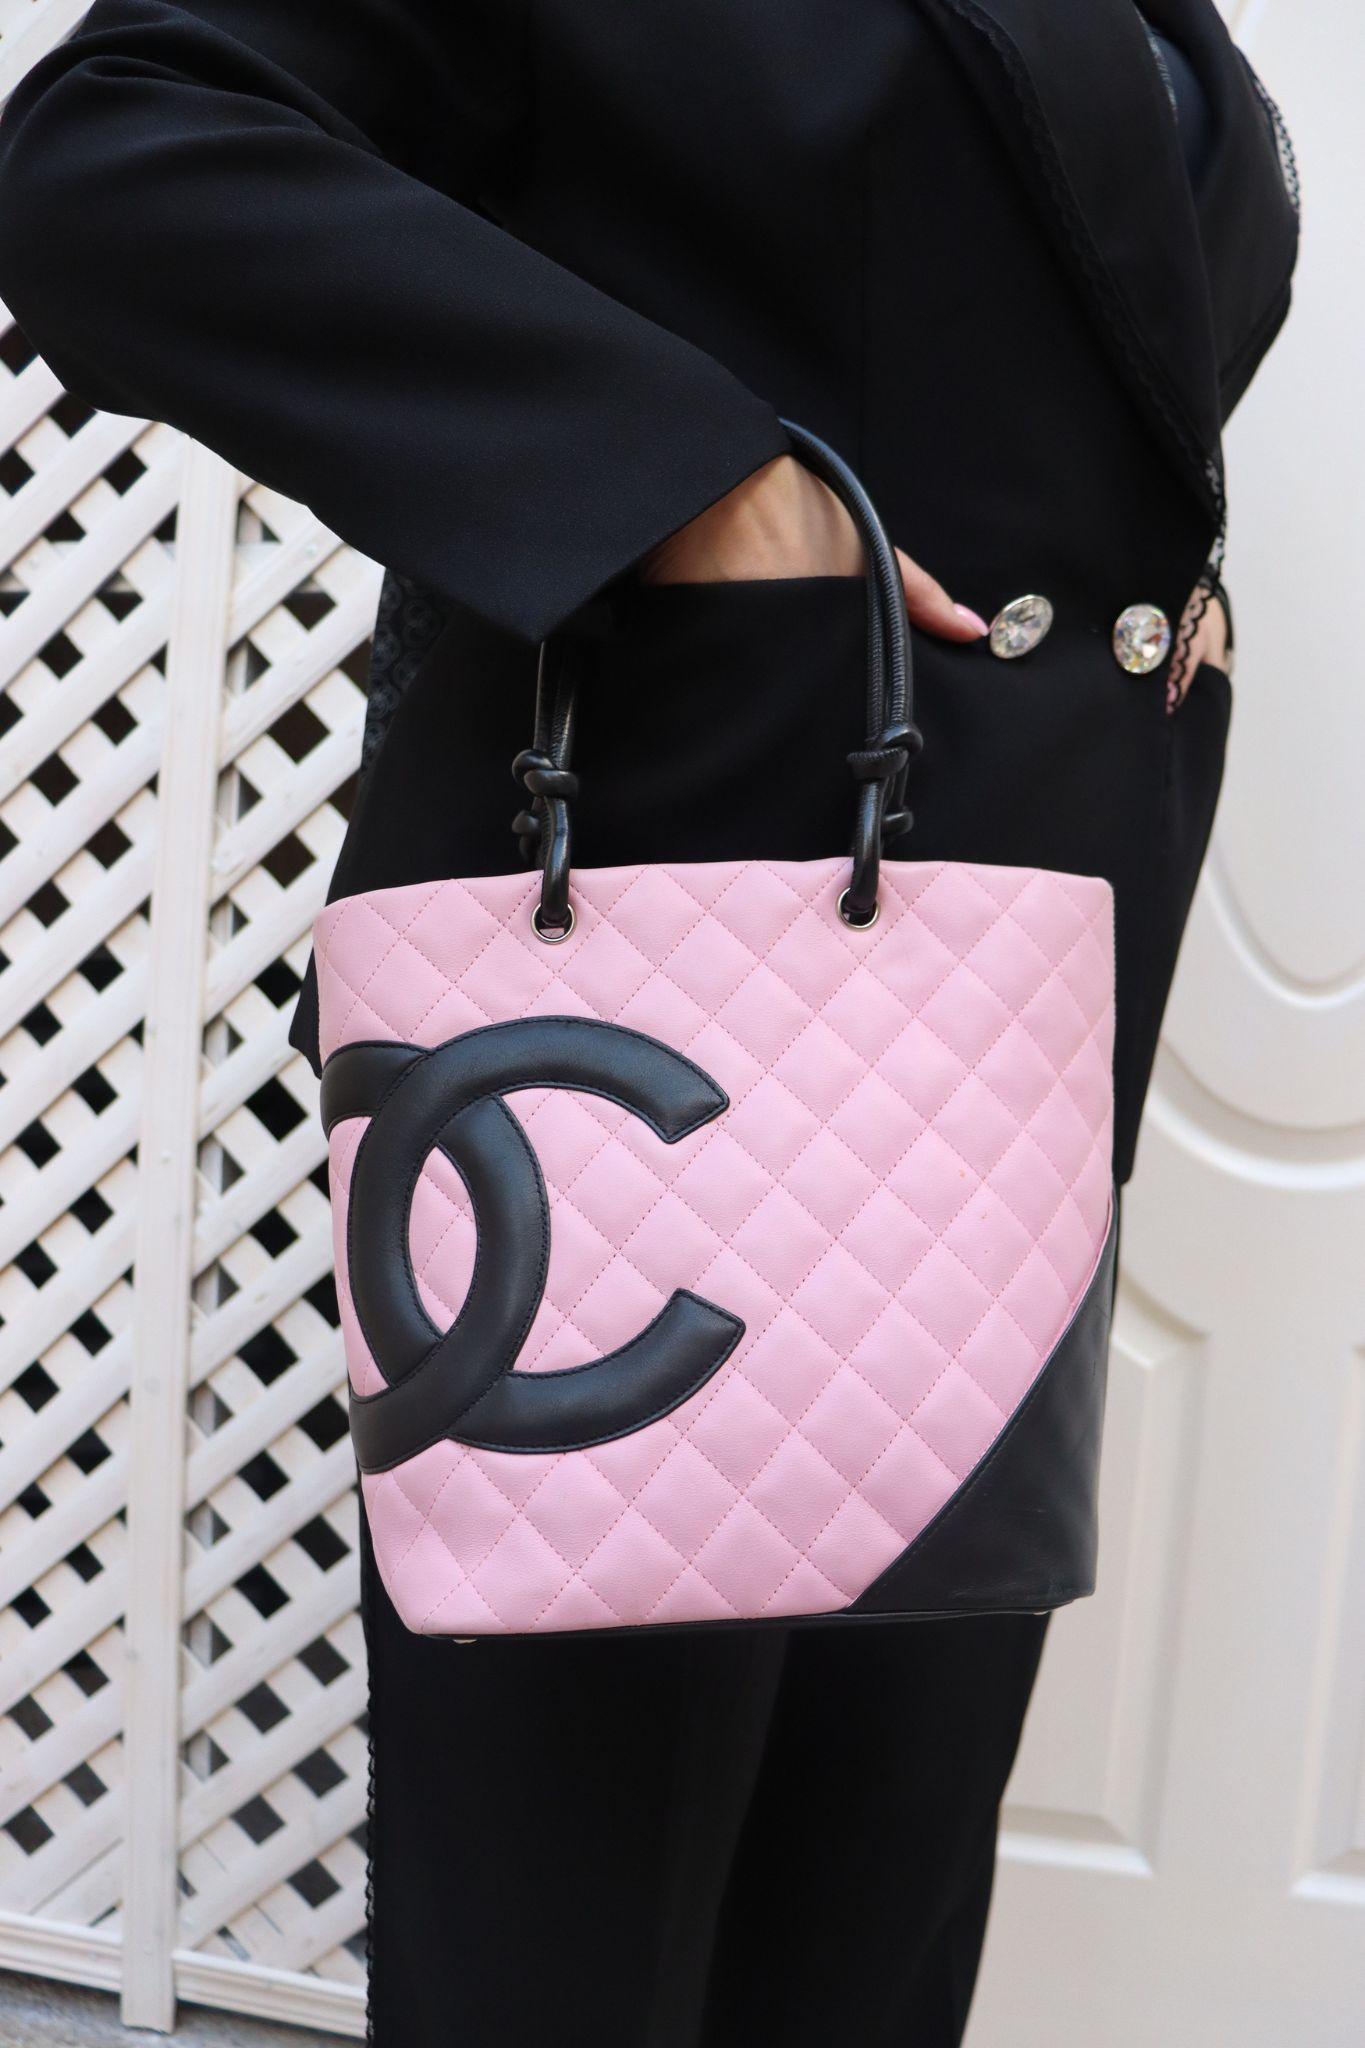 Chanel Medium Ligne Cambon Tote Bag, Features Large CC logo, Knotted Shoulder Straps, Logo Jacquard Lining and Two Interior Zipper Pockets.

Material: Leather
Hardware: Silver
Serial No. 96xxxxx
Height: 24cm
Width: 20cm
Depth: 11.5cm
Shoulder Drop: